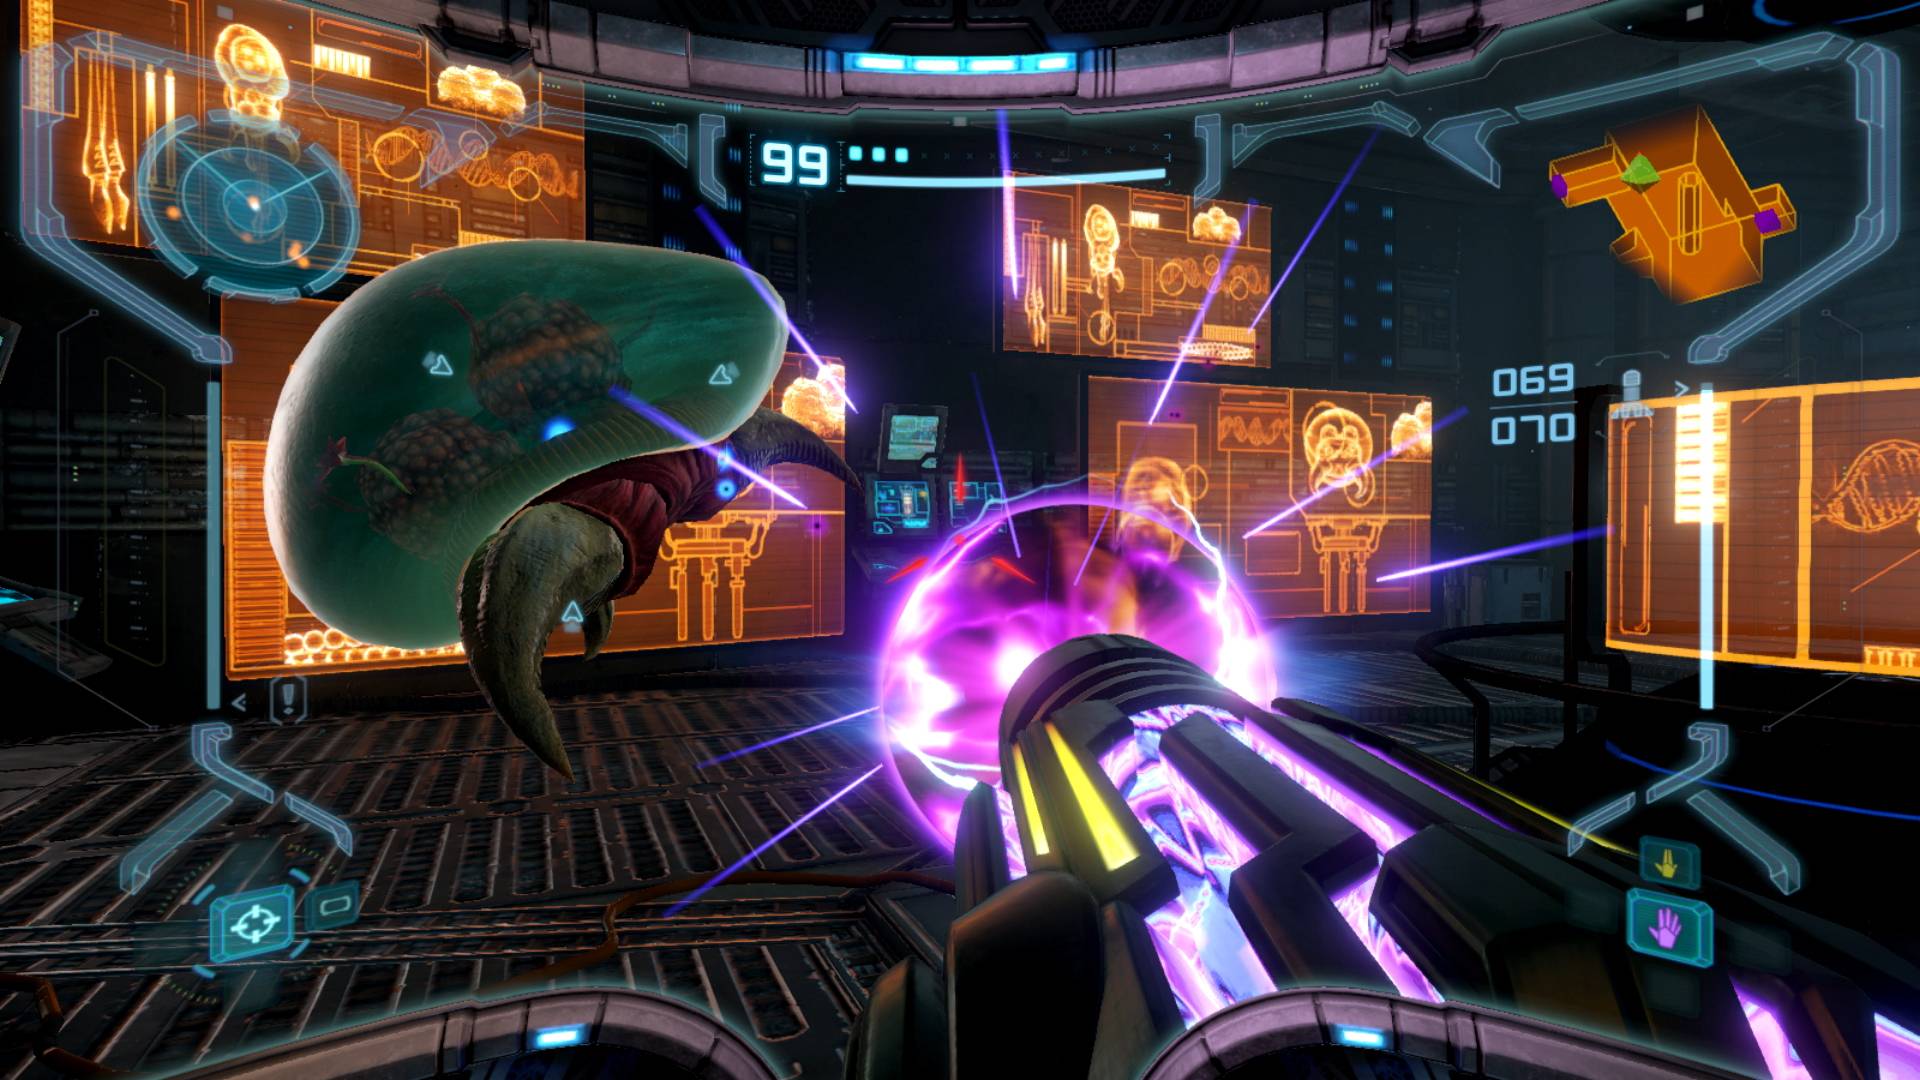 metroid-prime-remastered-review-an-arm-cannon-blast-from-the-past-pocket-tactics